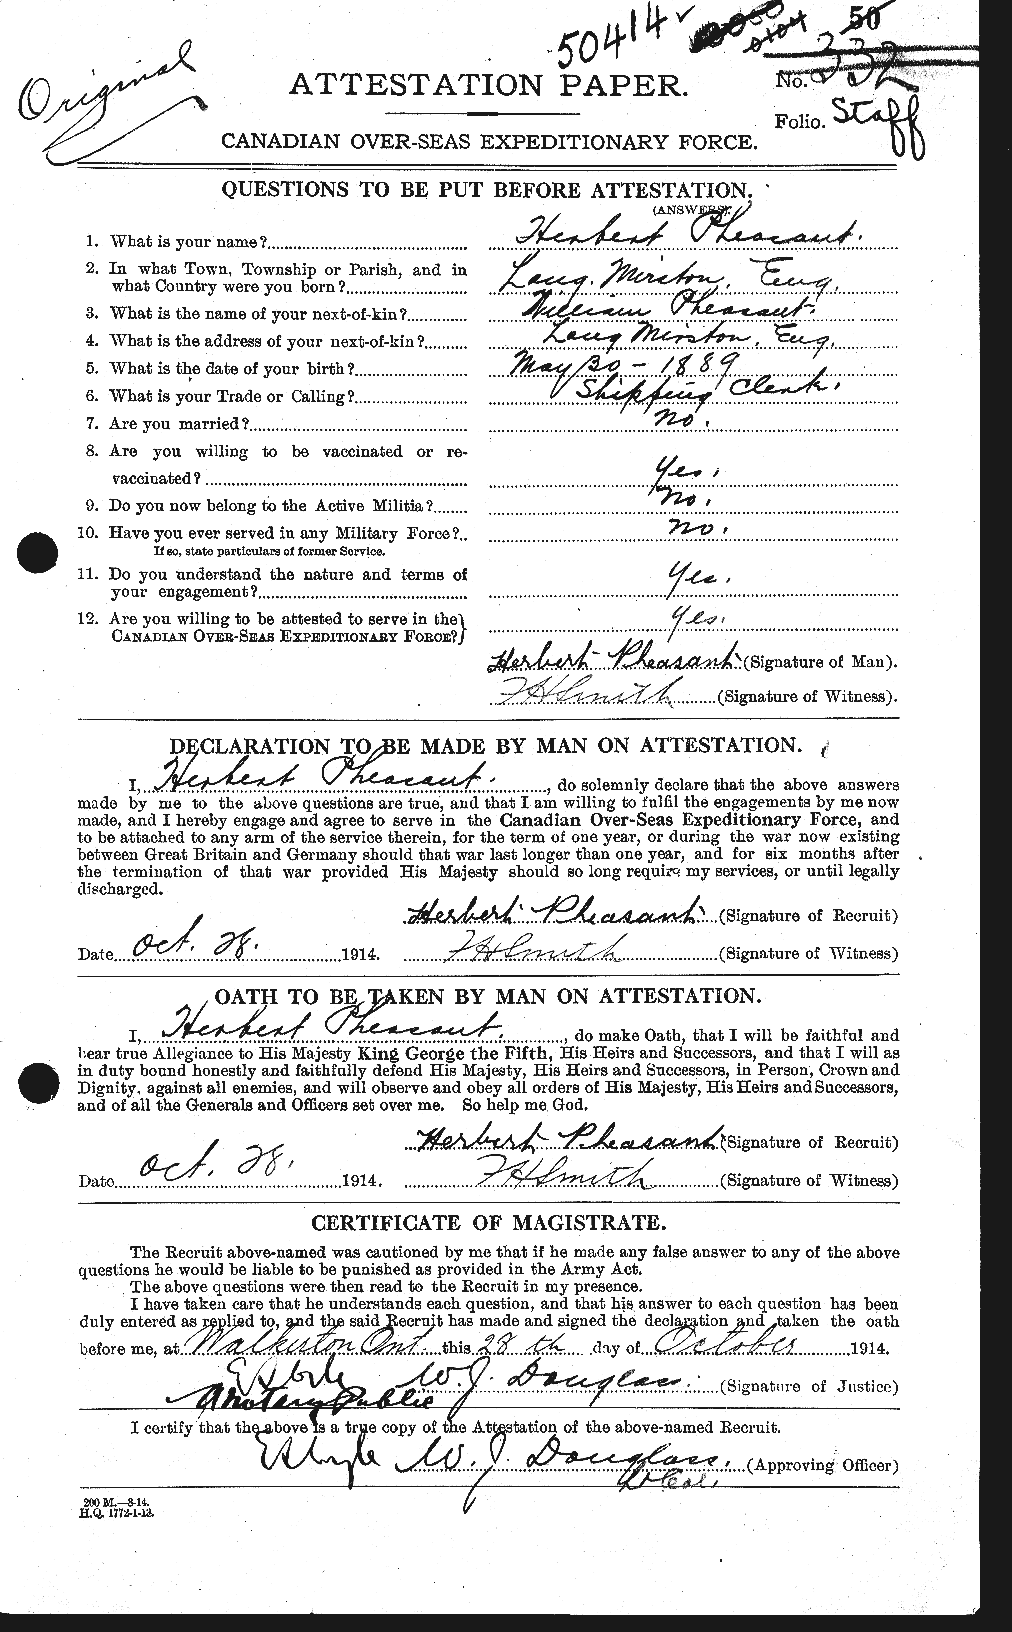 Personnel Records of the First World War - CEF 576918a